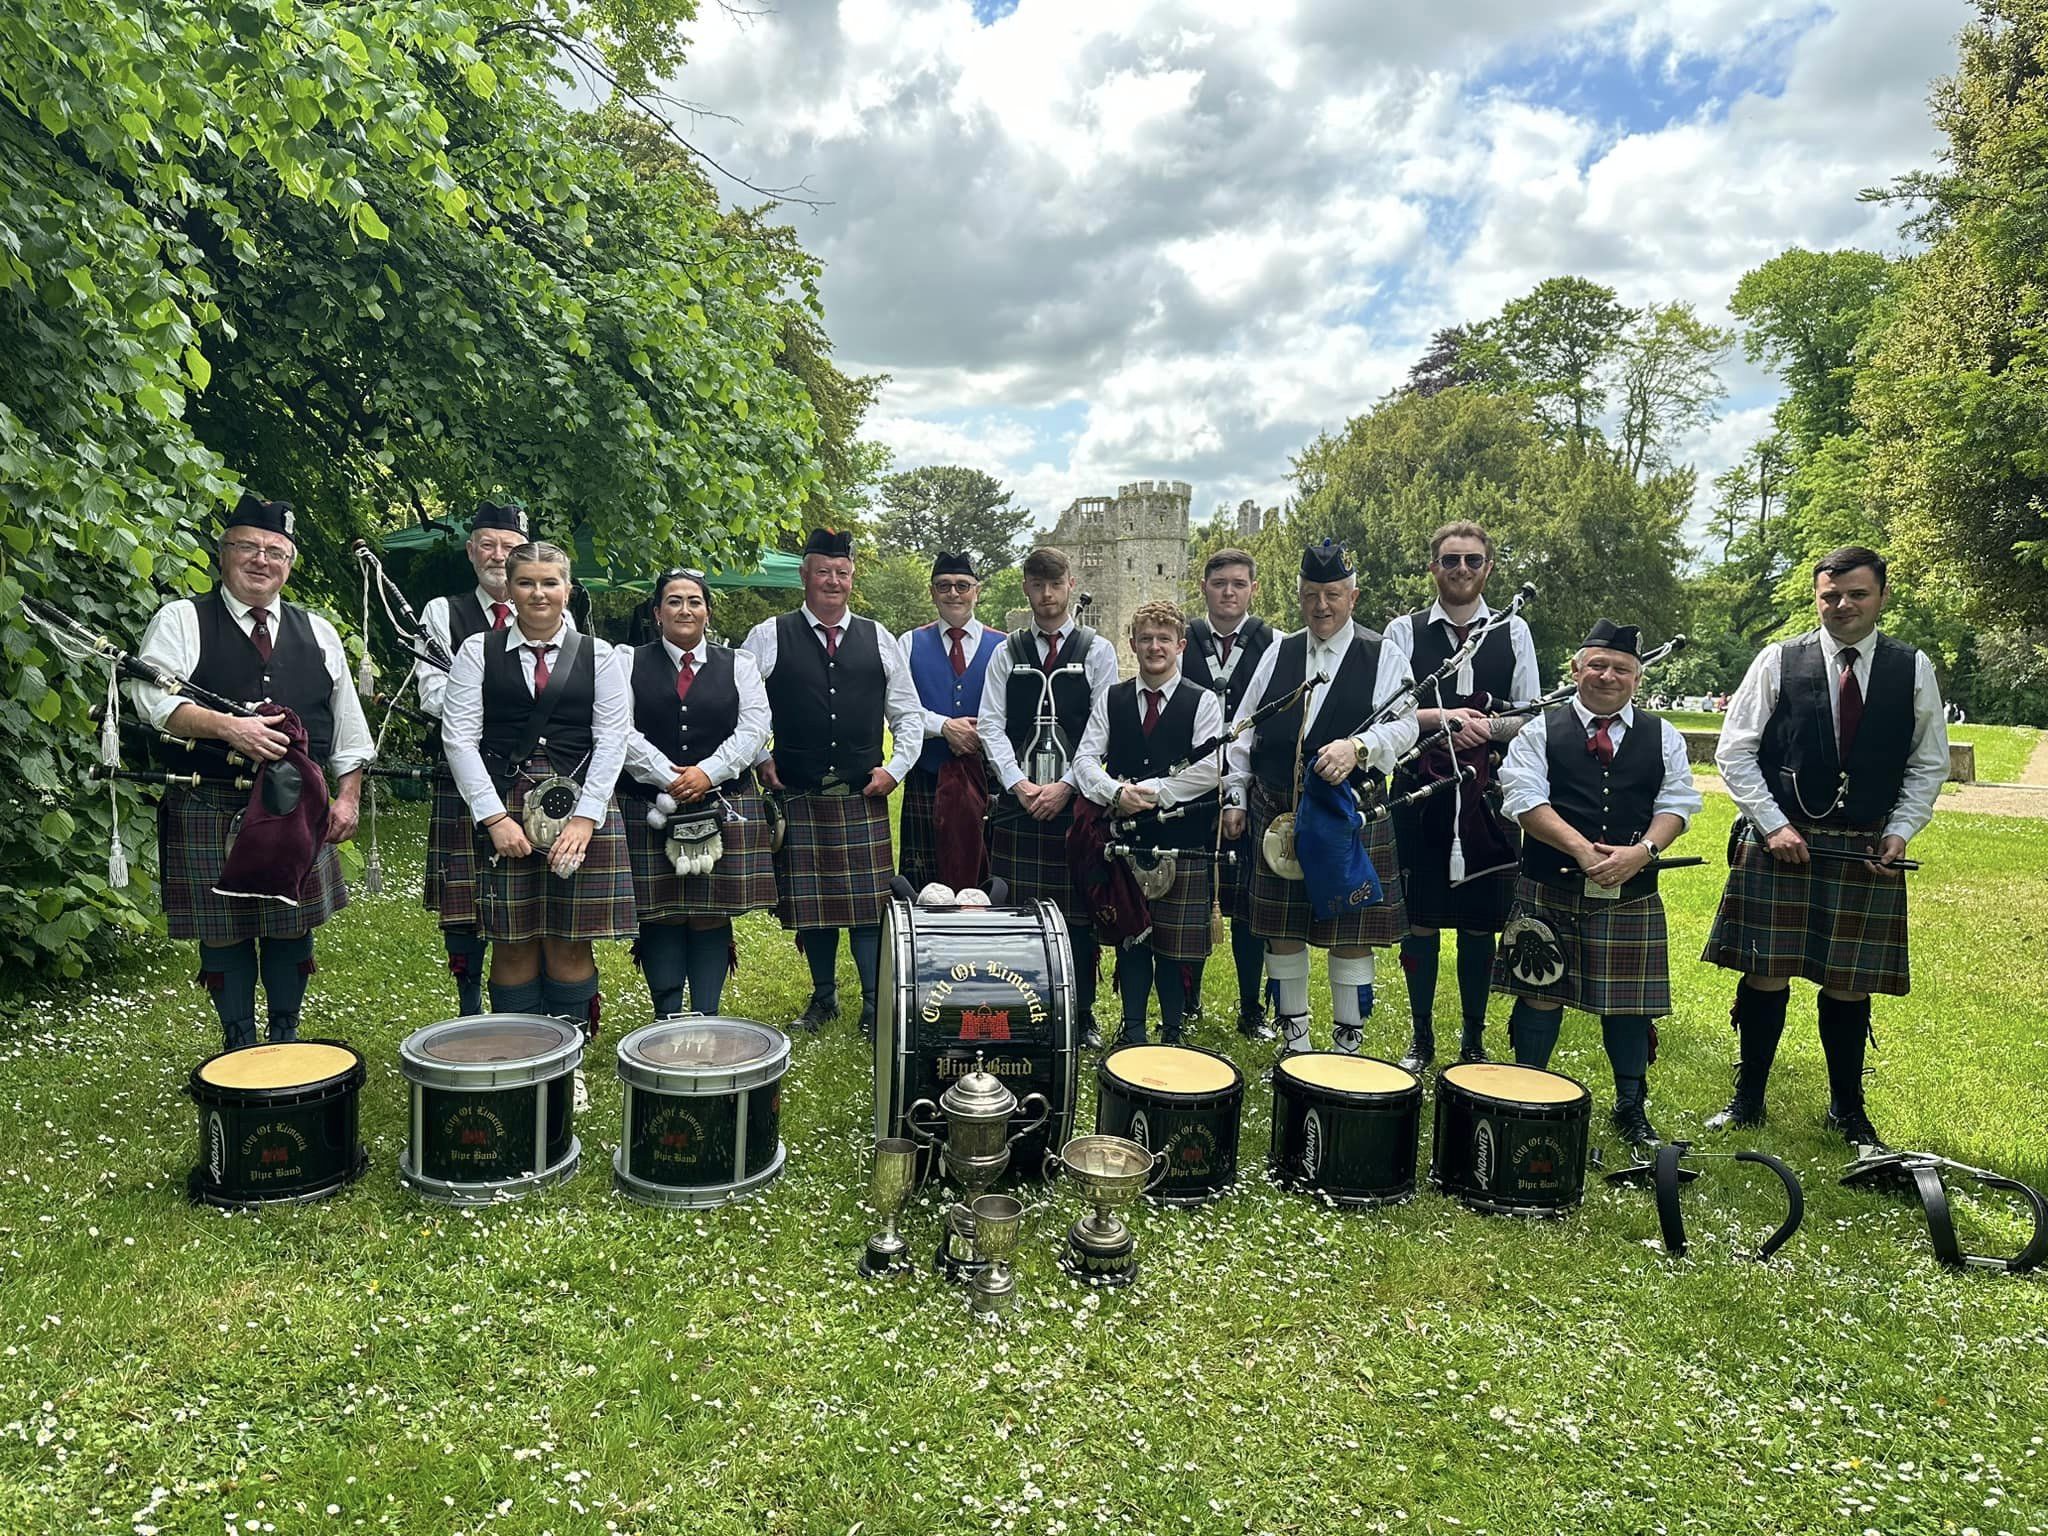 City of Limerick Pipe Band celebrates 75 years of Limerick tradition